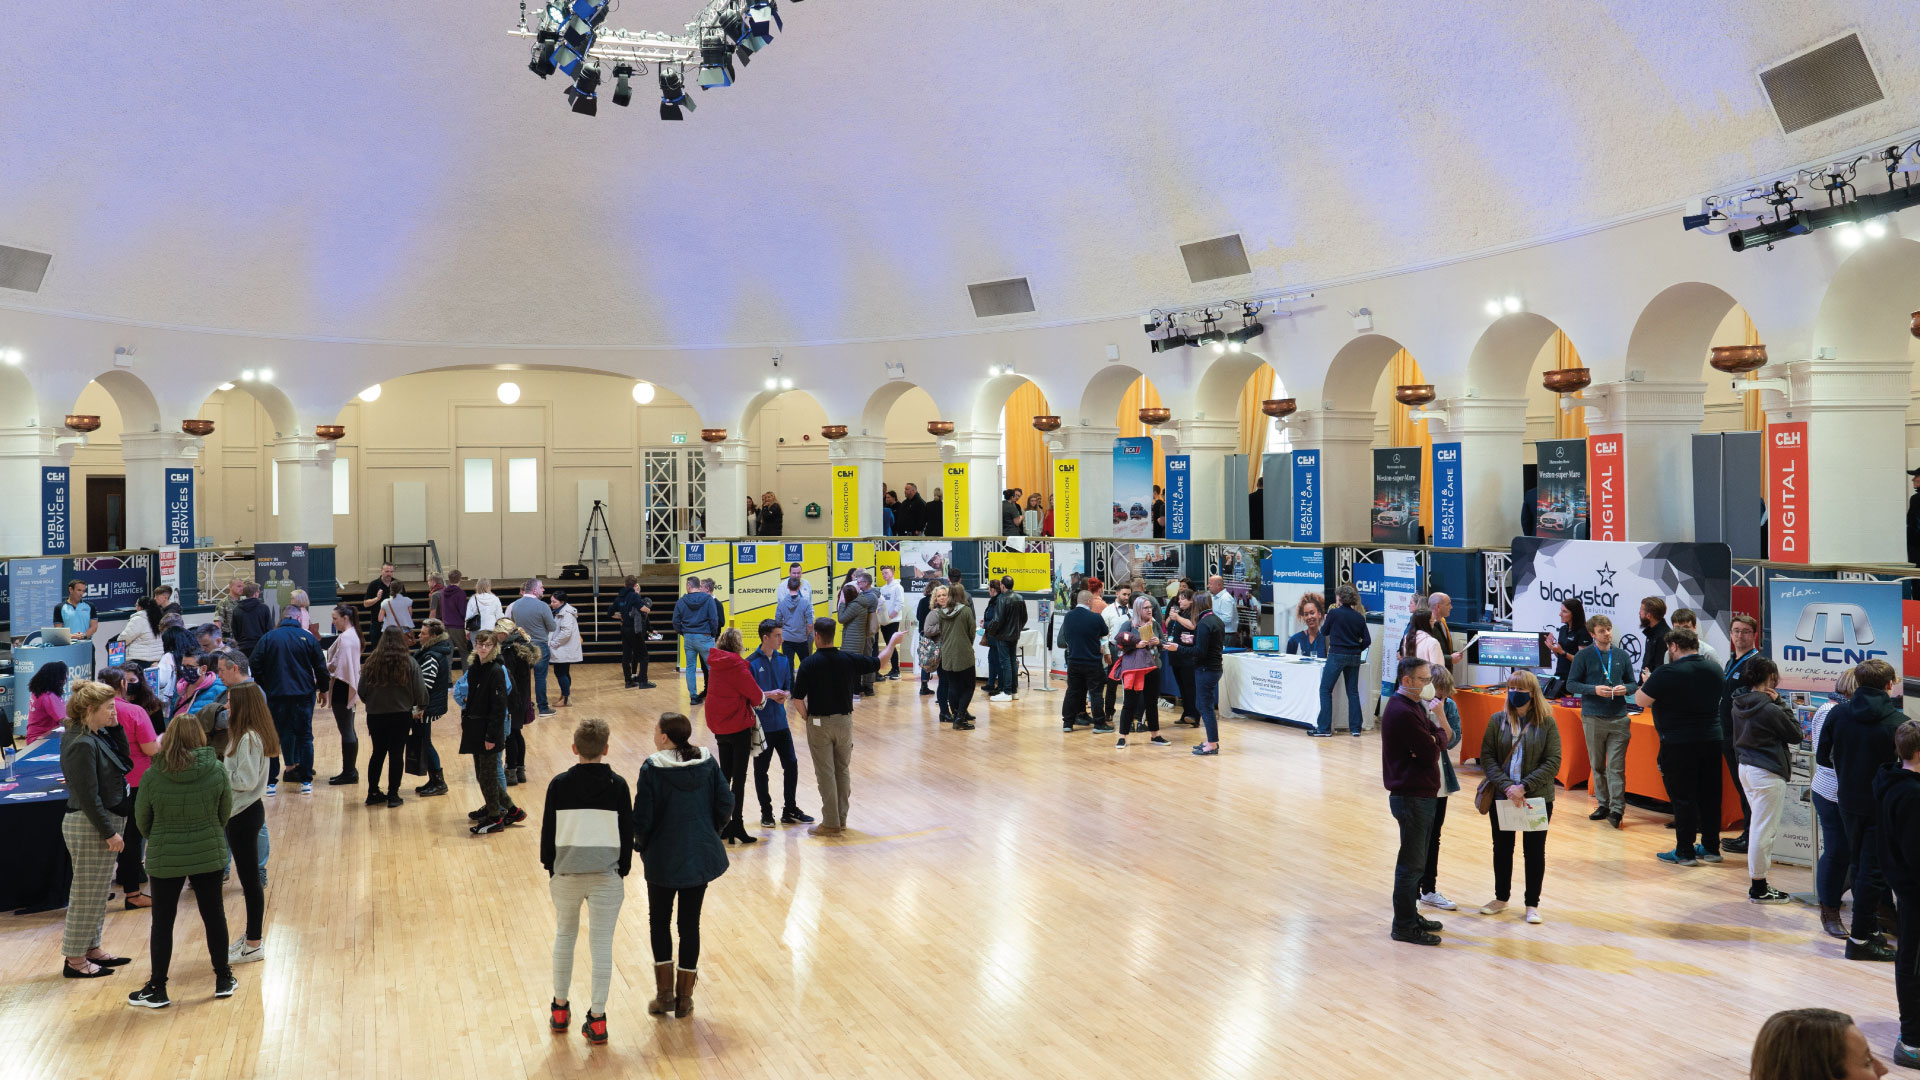 Overview of winter gradens - showing people at the event